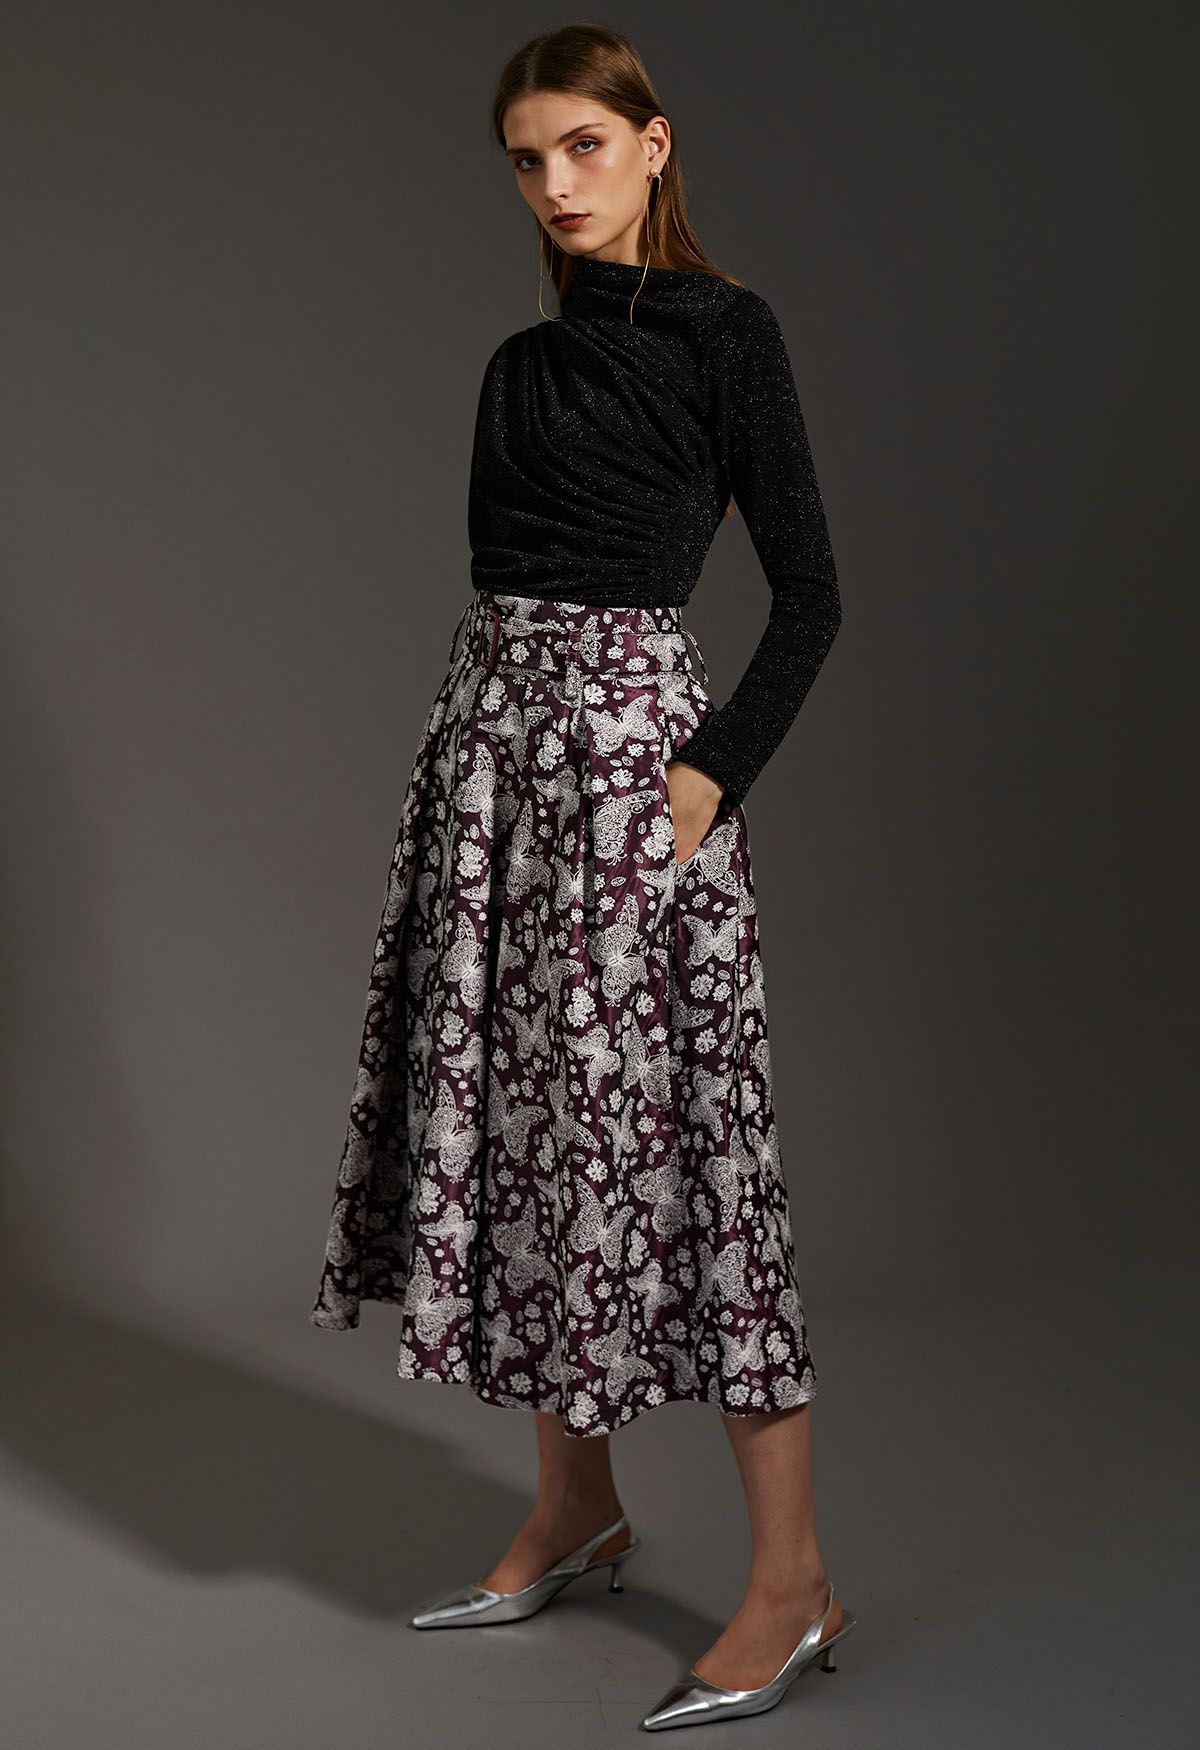 Whimsical Butterfly Belted A-Line Midi Skirt in Burgundy